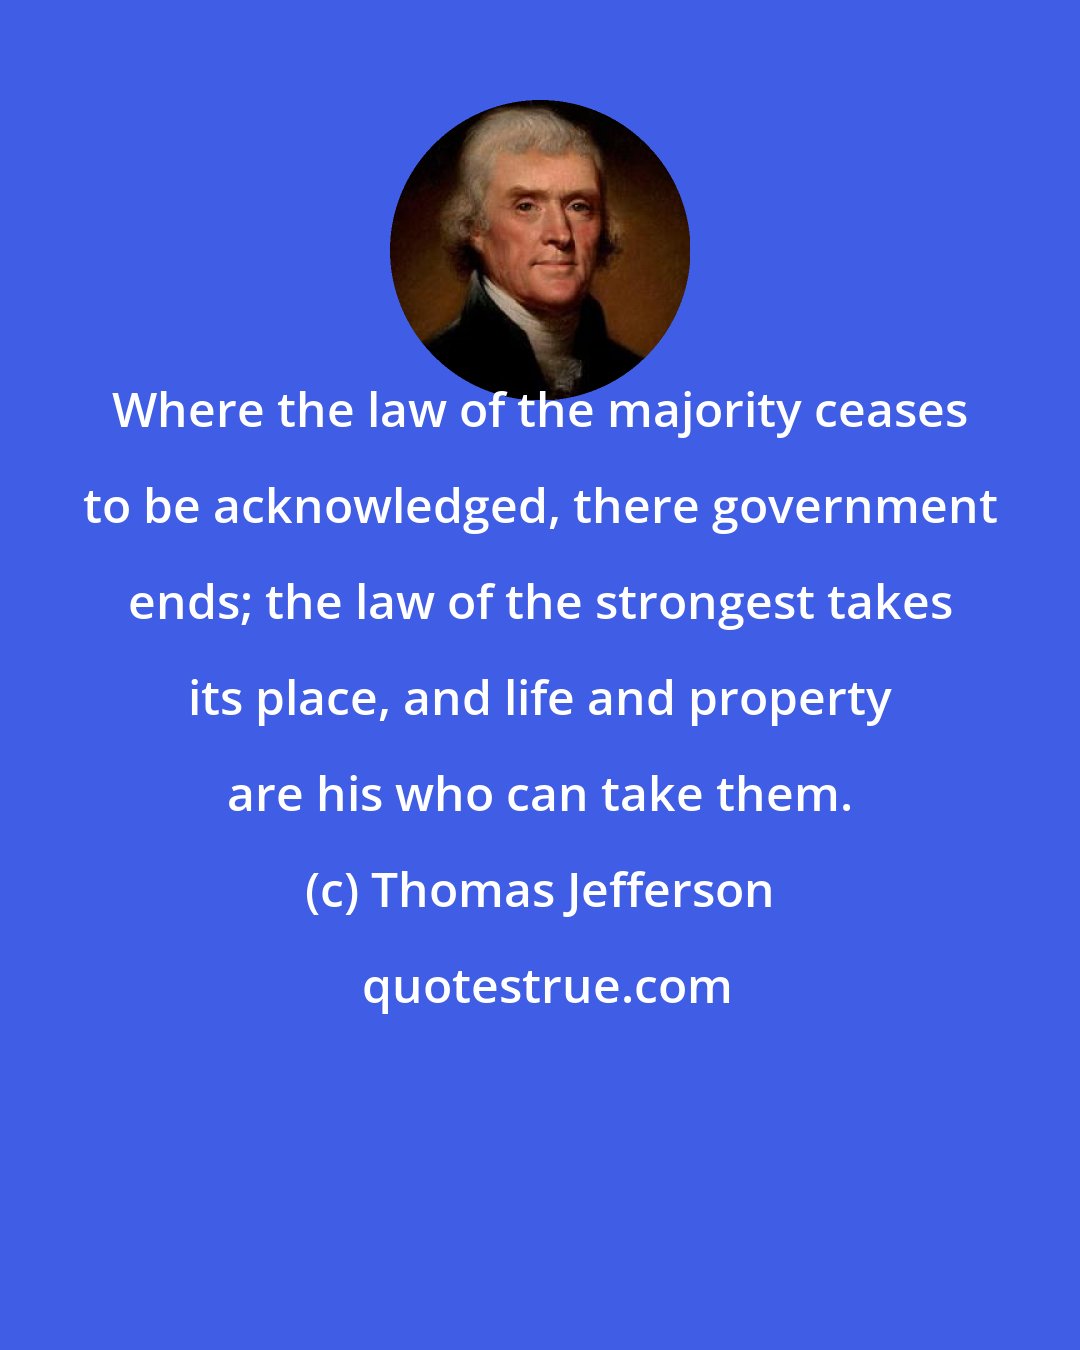 Thomas Jefferson: Where the law of the majority ceases to be acknowledged, there government ends; the law of the strongest takes its place, and life and property are his who can take them.